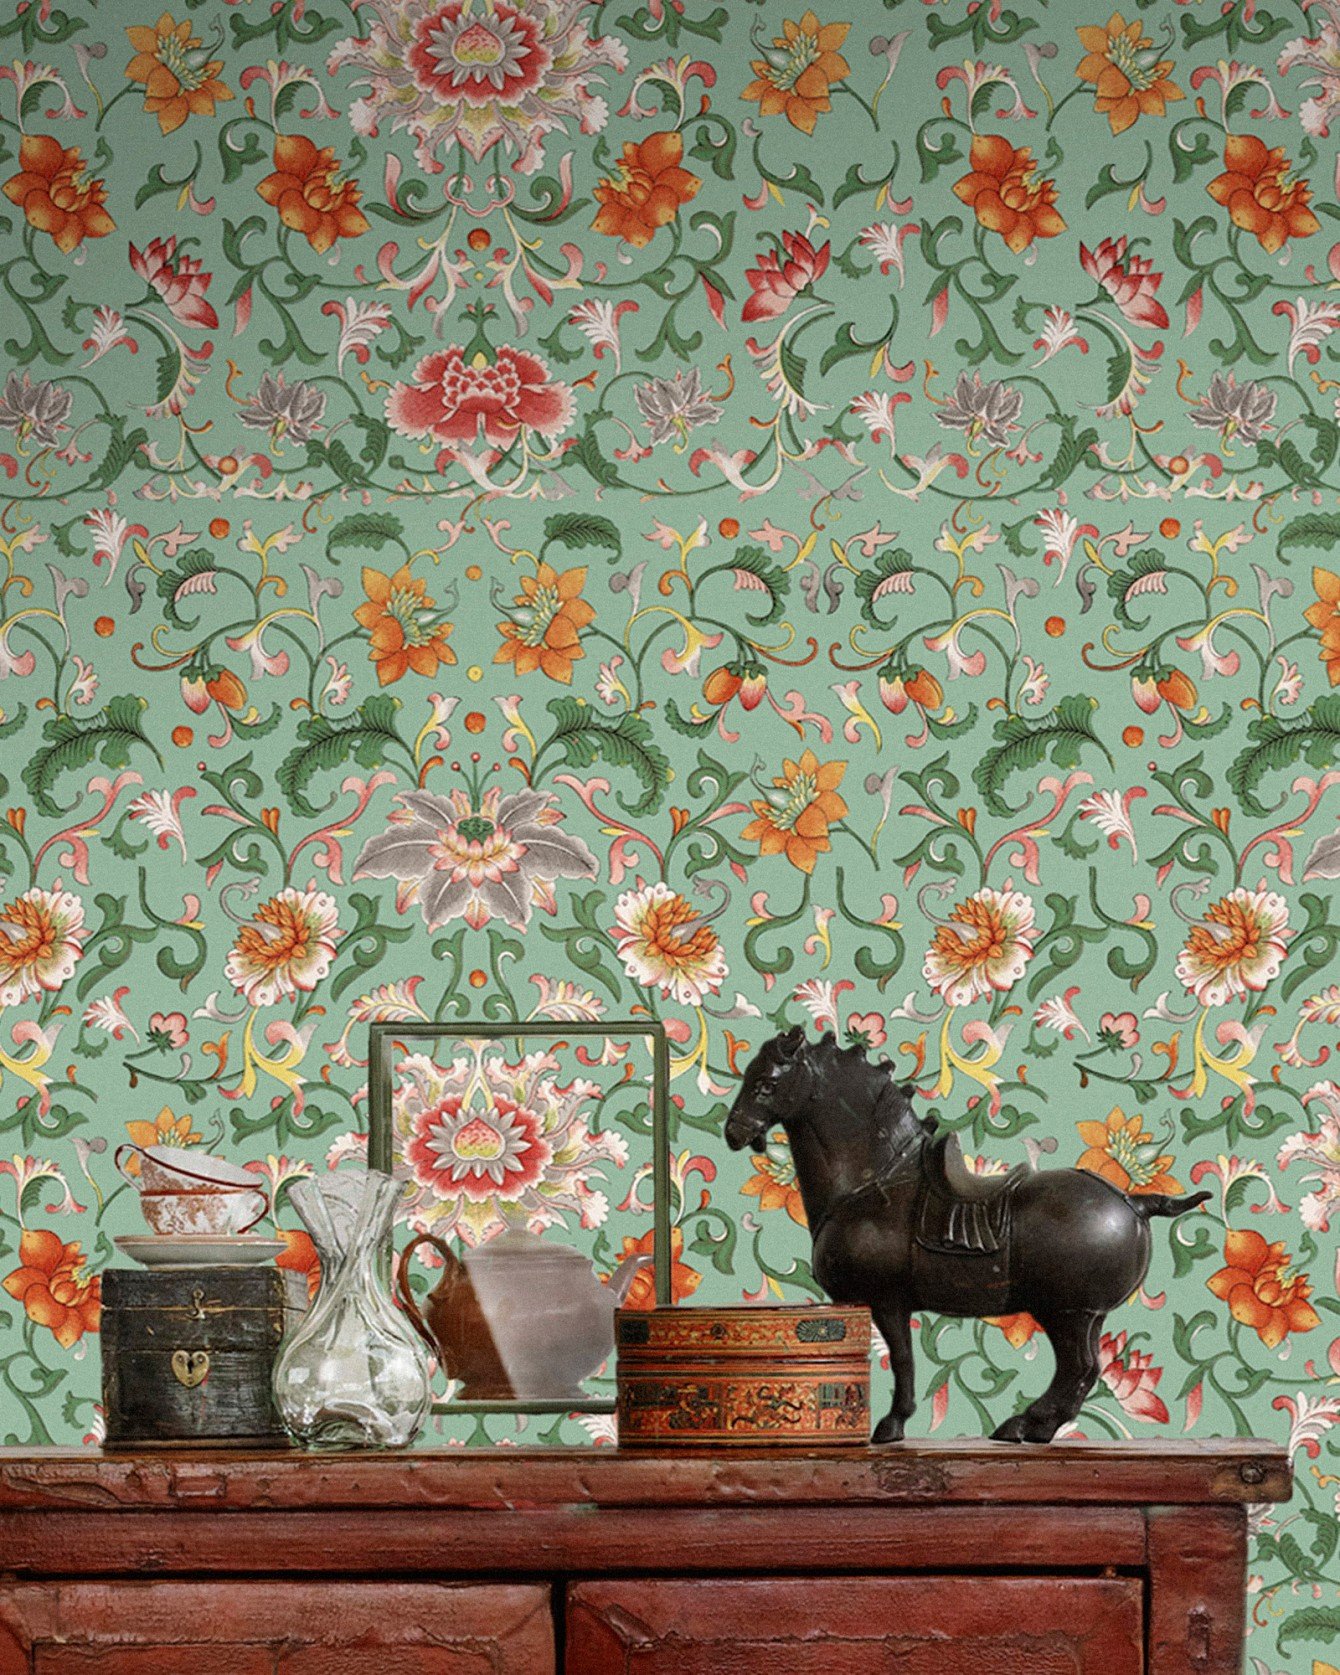 Chinese Floral Wallpaper In Green And Orange From The Eclectic